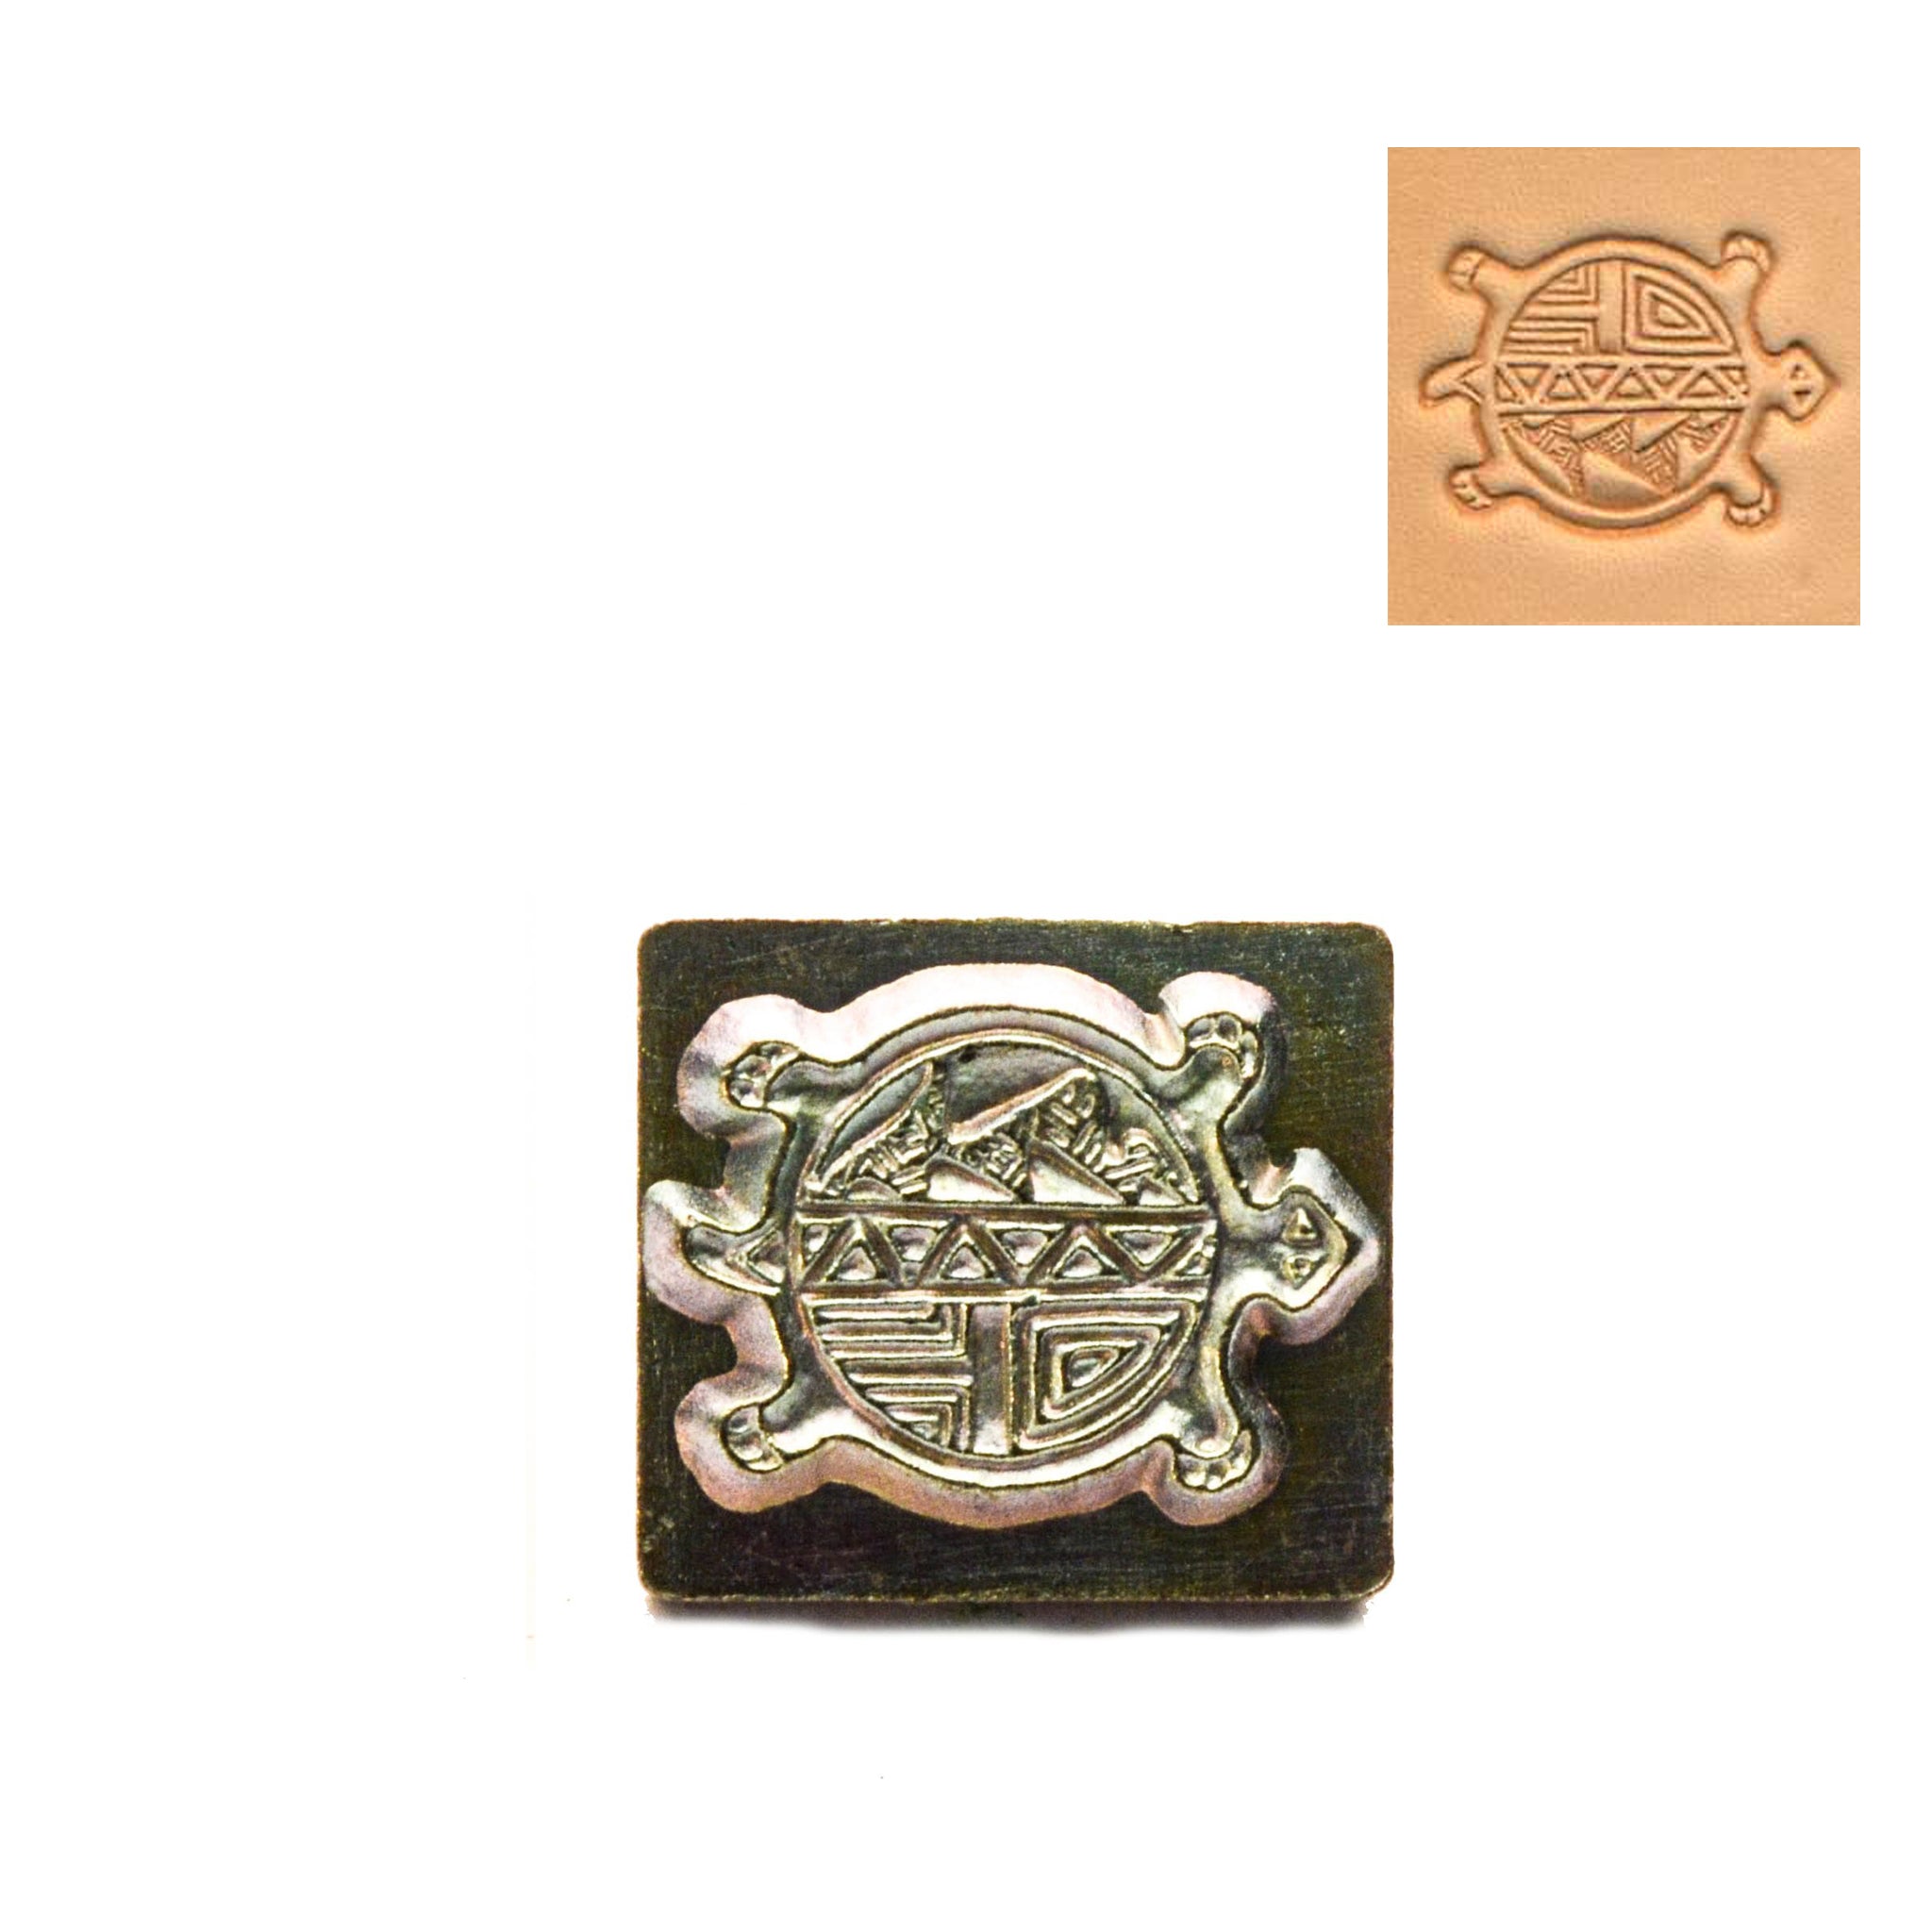 Round Turtle 3D Embossing Stamp from Identity Leathercraft